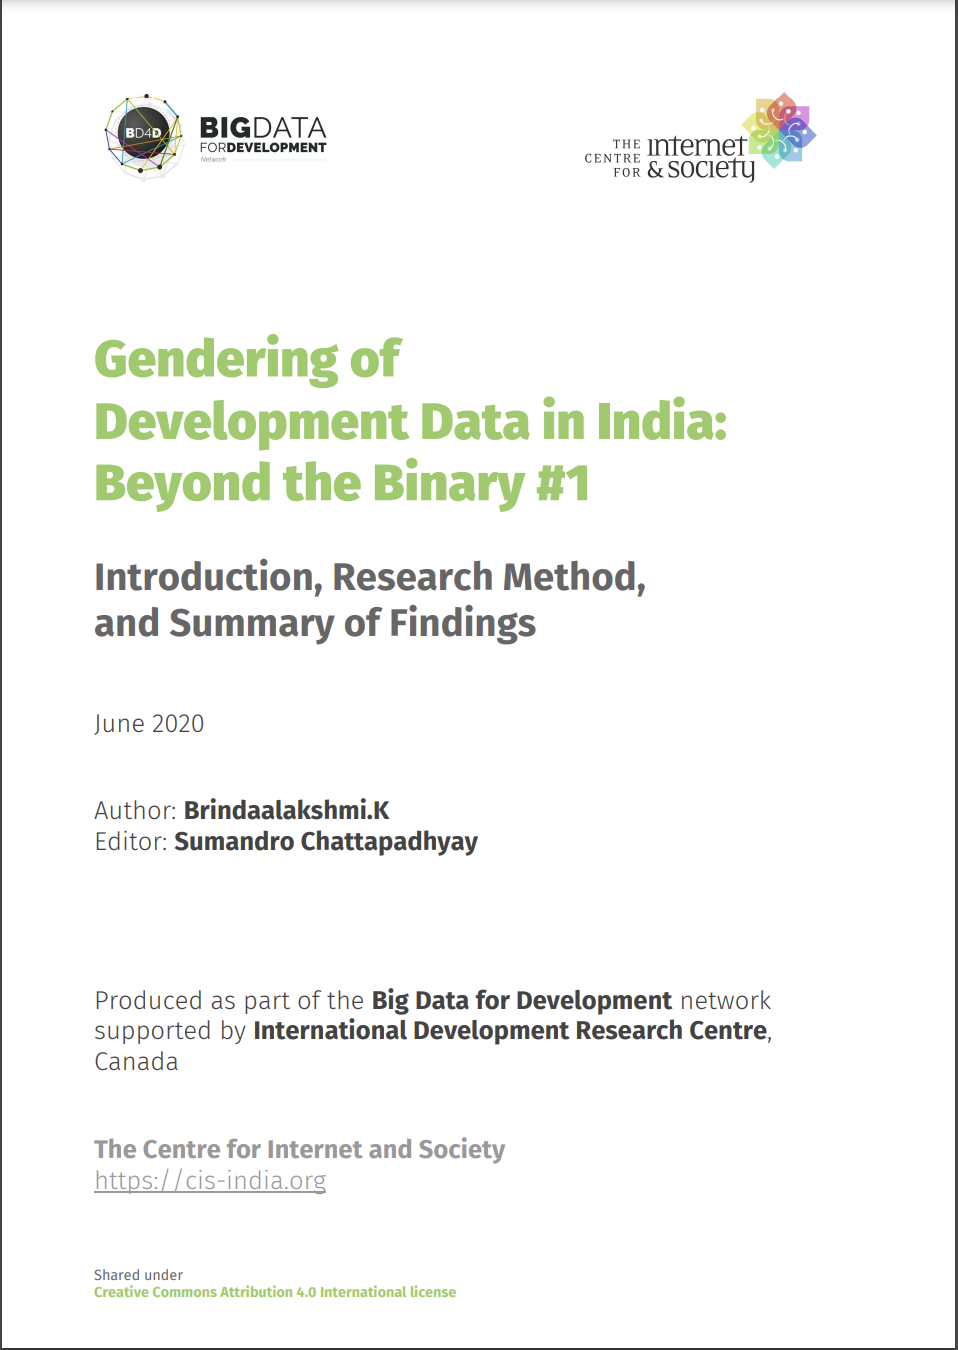 Gendering of Development Data in India.png